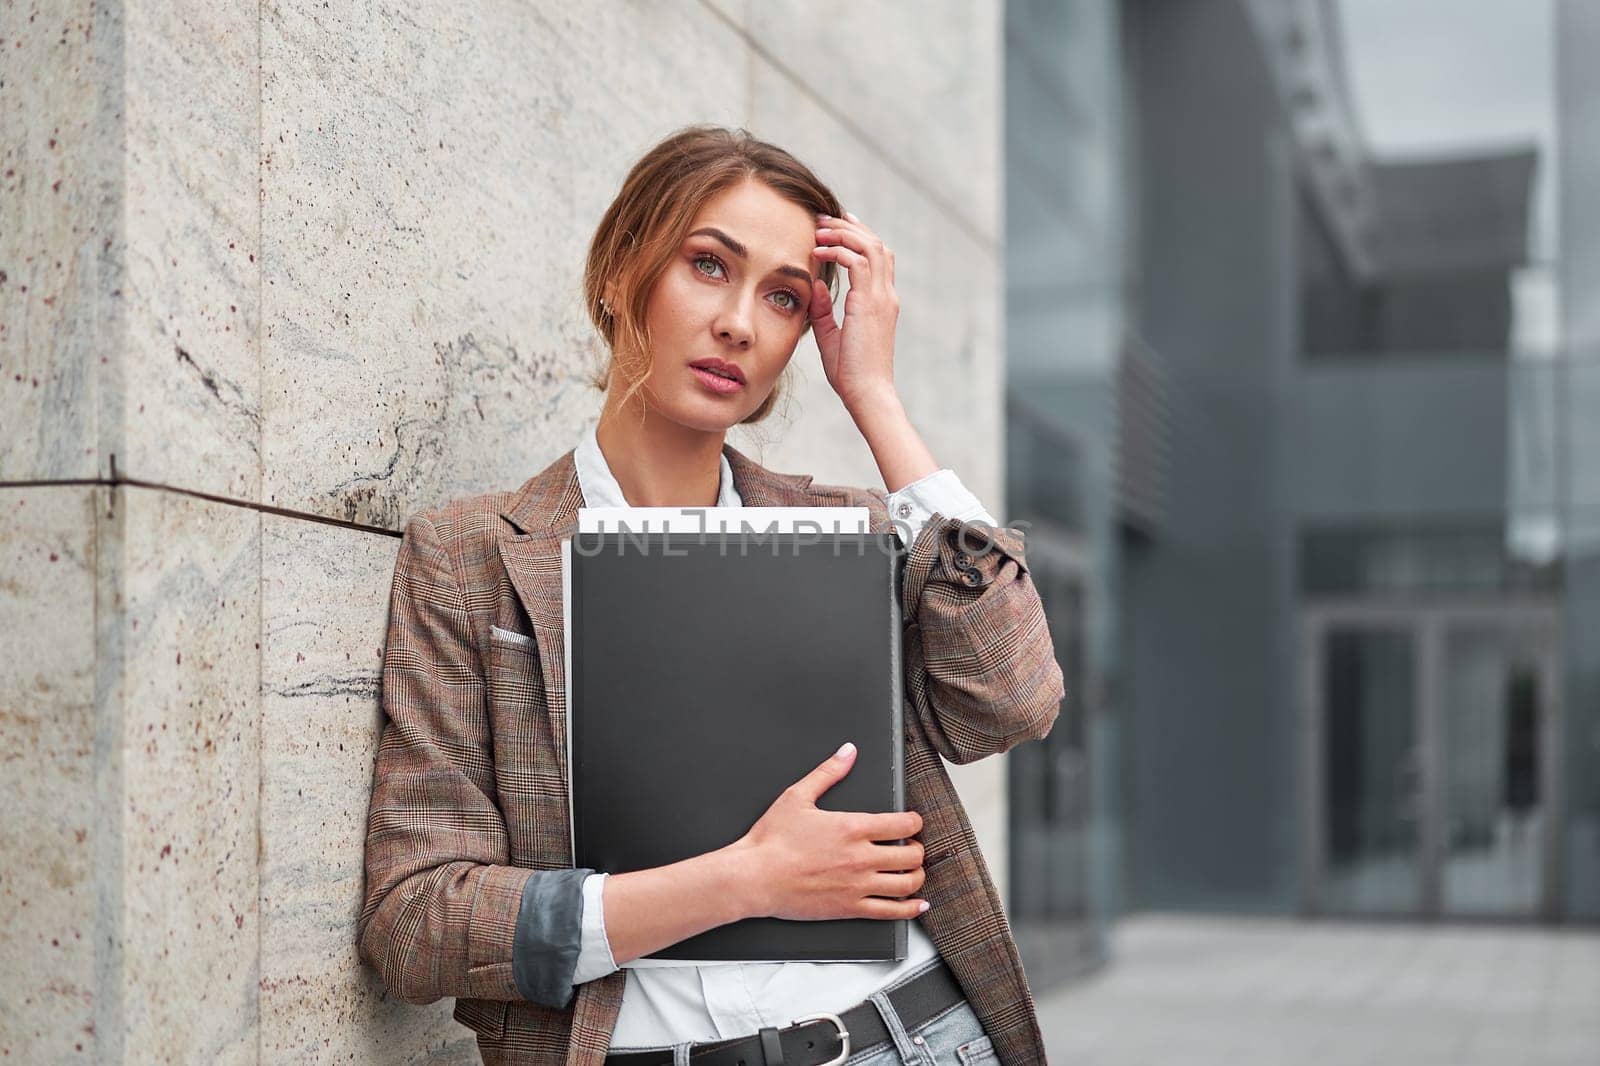 stressed businesswoman touching head standing outside business district. Worried female business person with headache pain holding document folder in hand